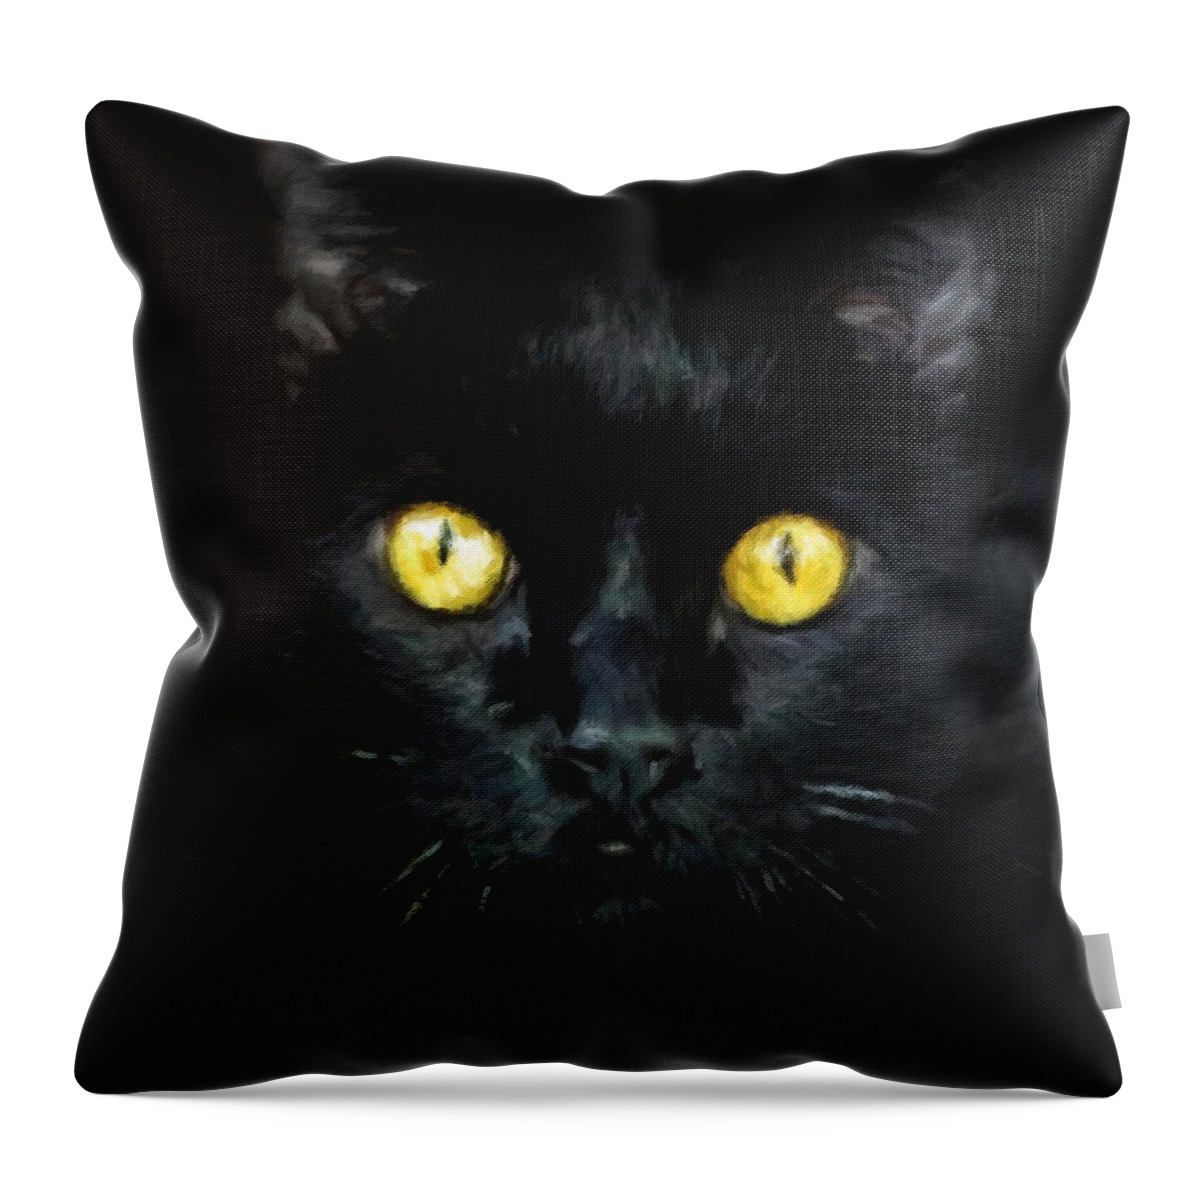 Black Cat Throw Pillow featuring the painting Black Cat With Golden Eyes by Modern Art